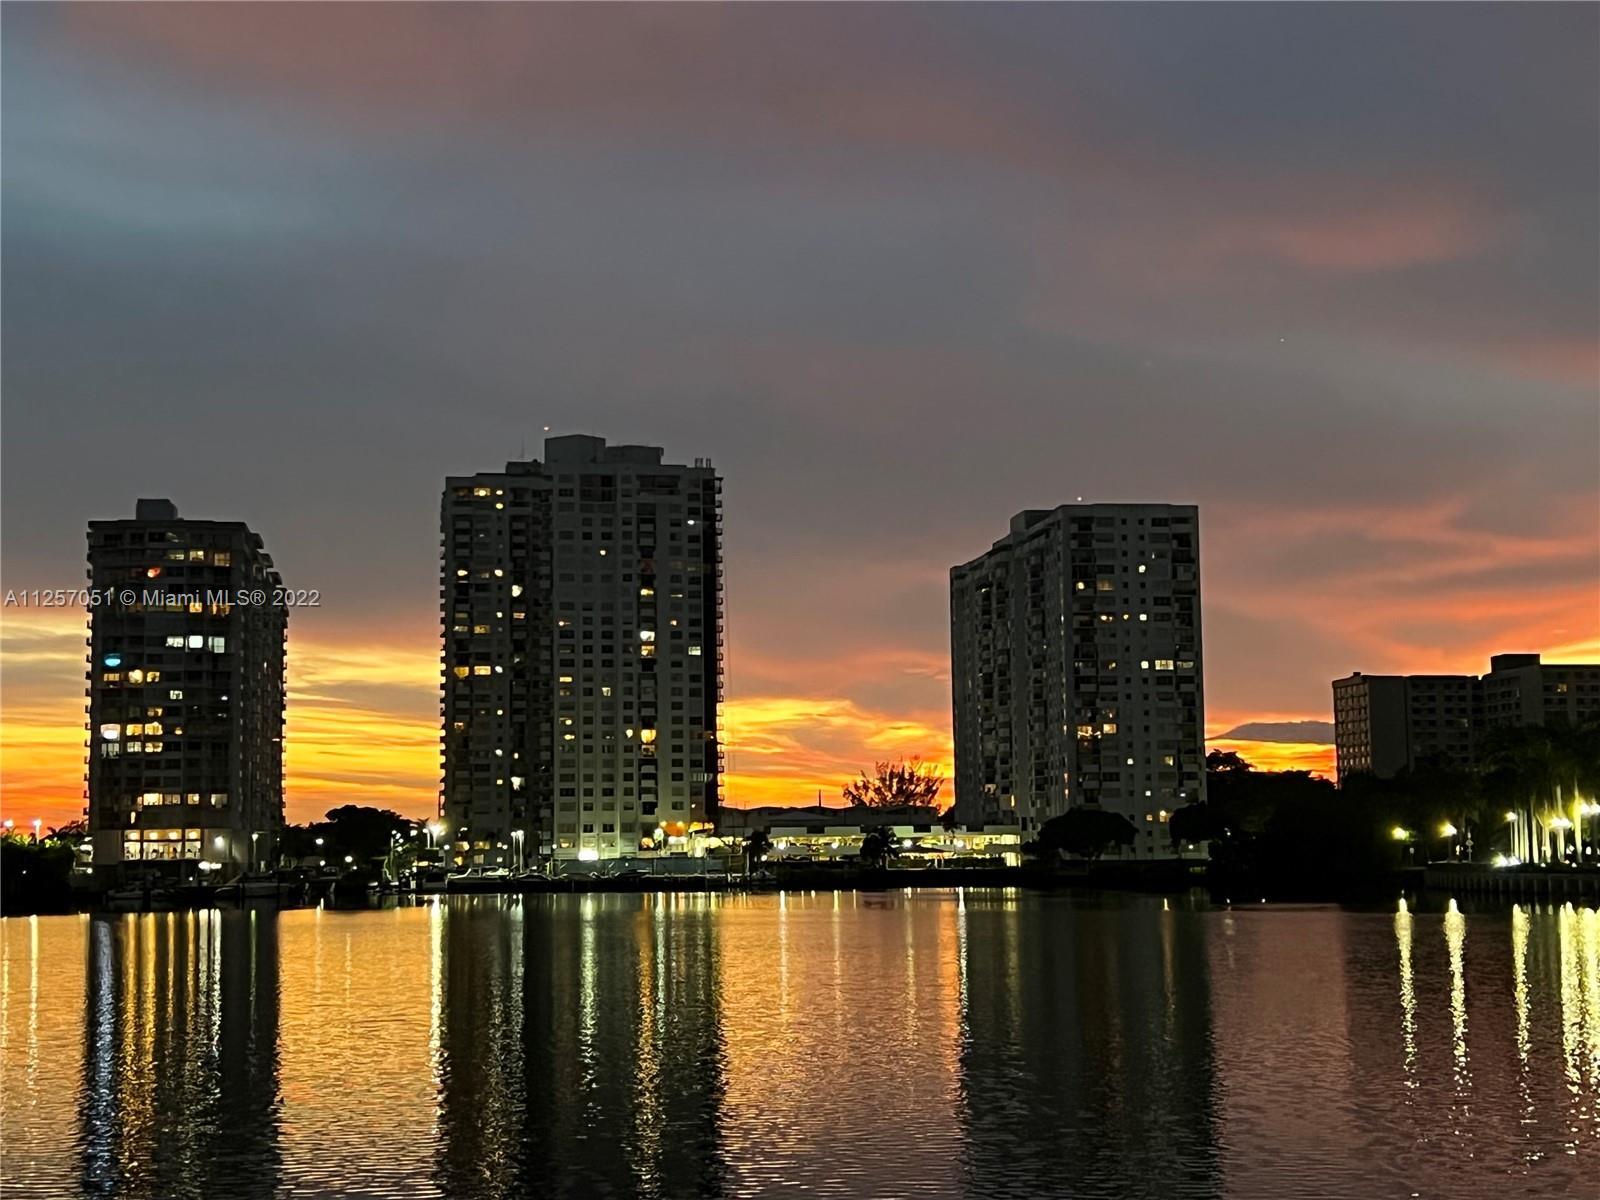 A beautiful unit in Aventura, located at the entrance of Williams Island, behind The Fresh Market, 5